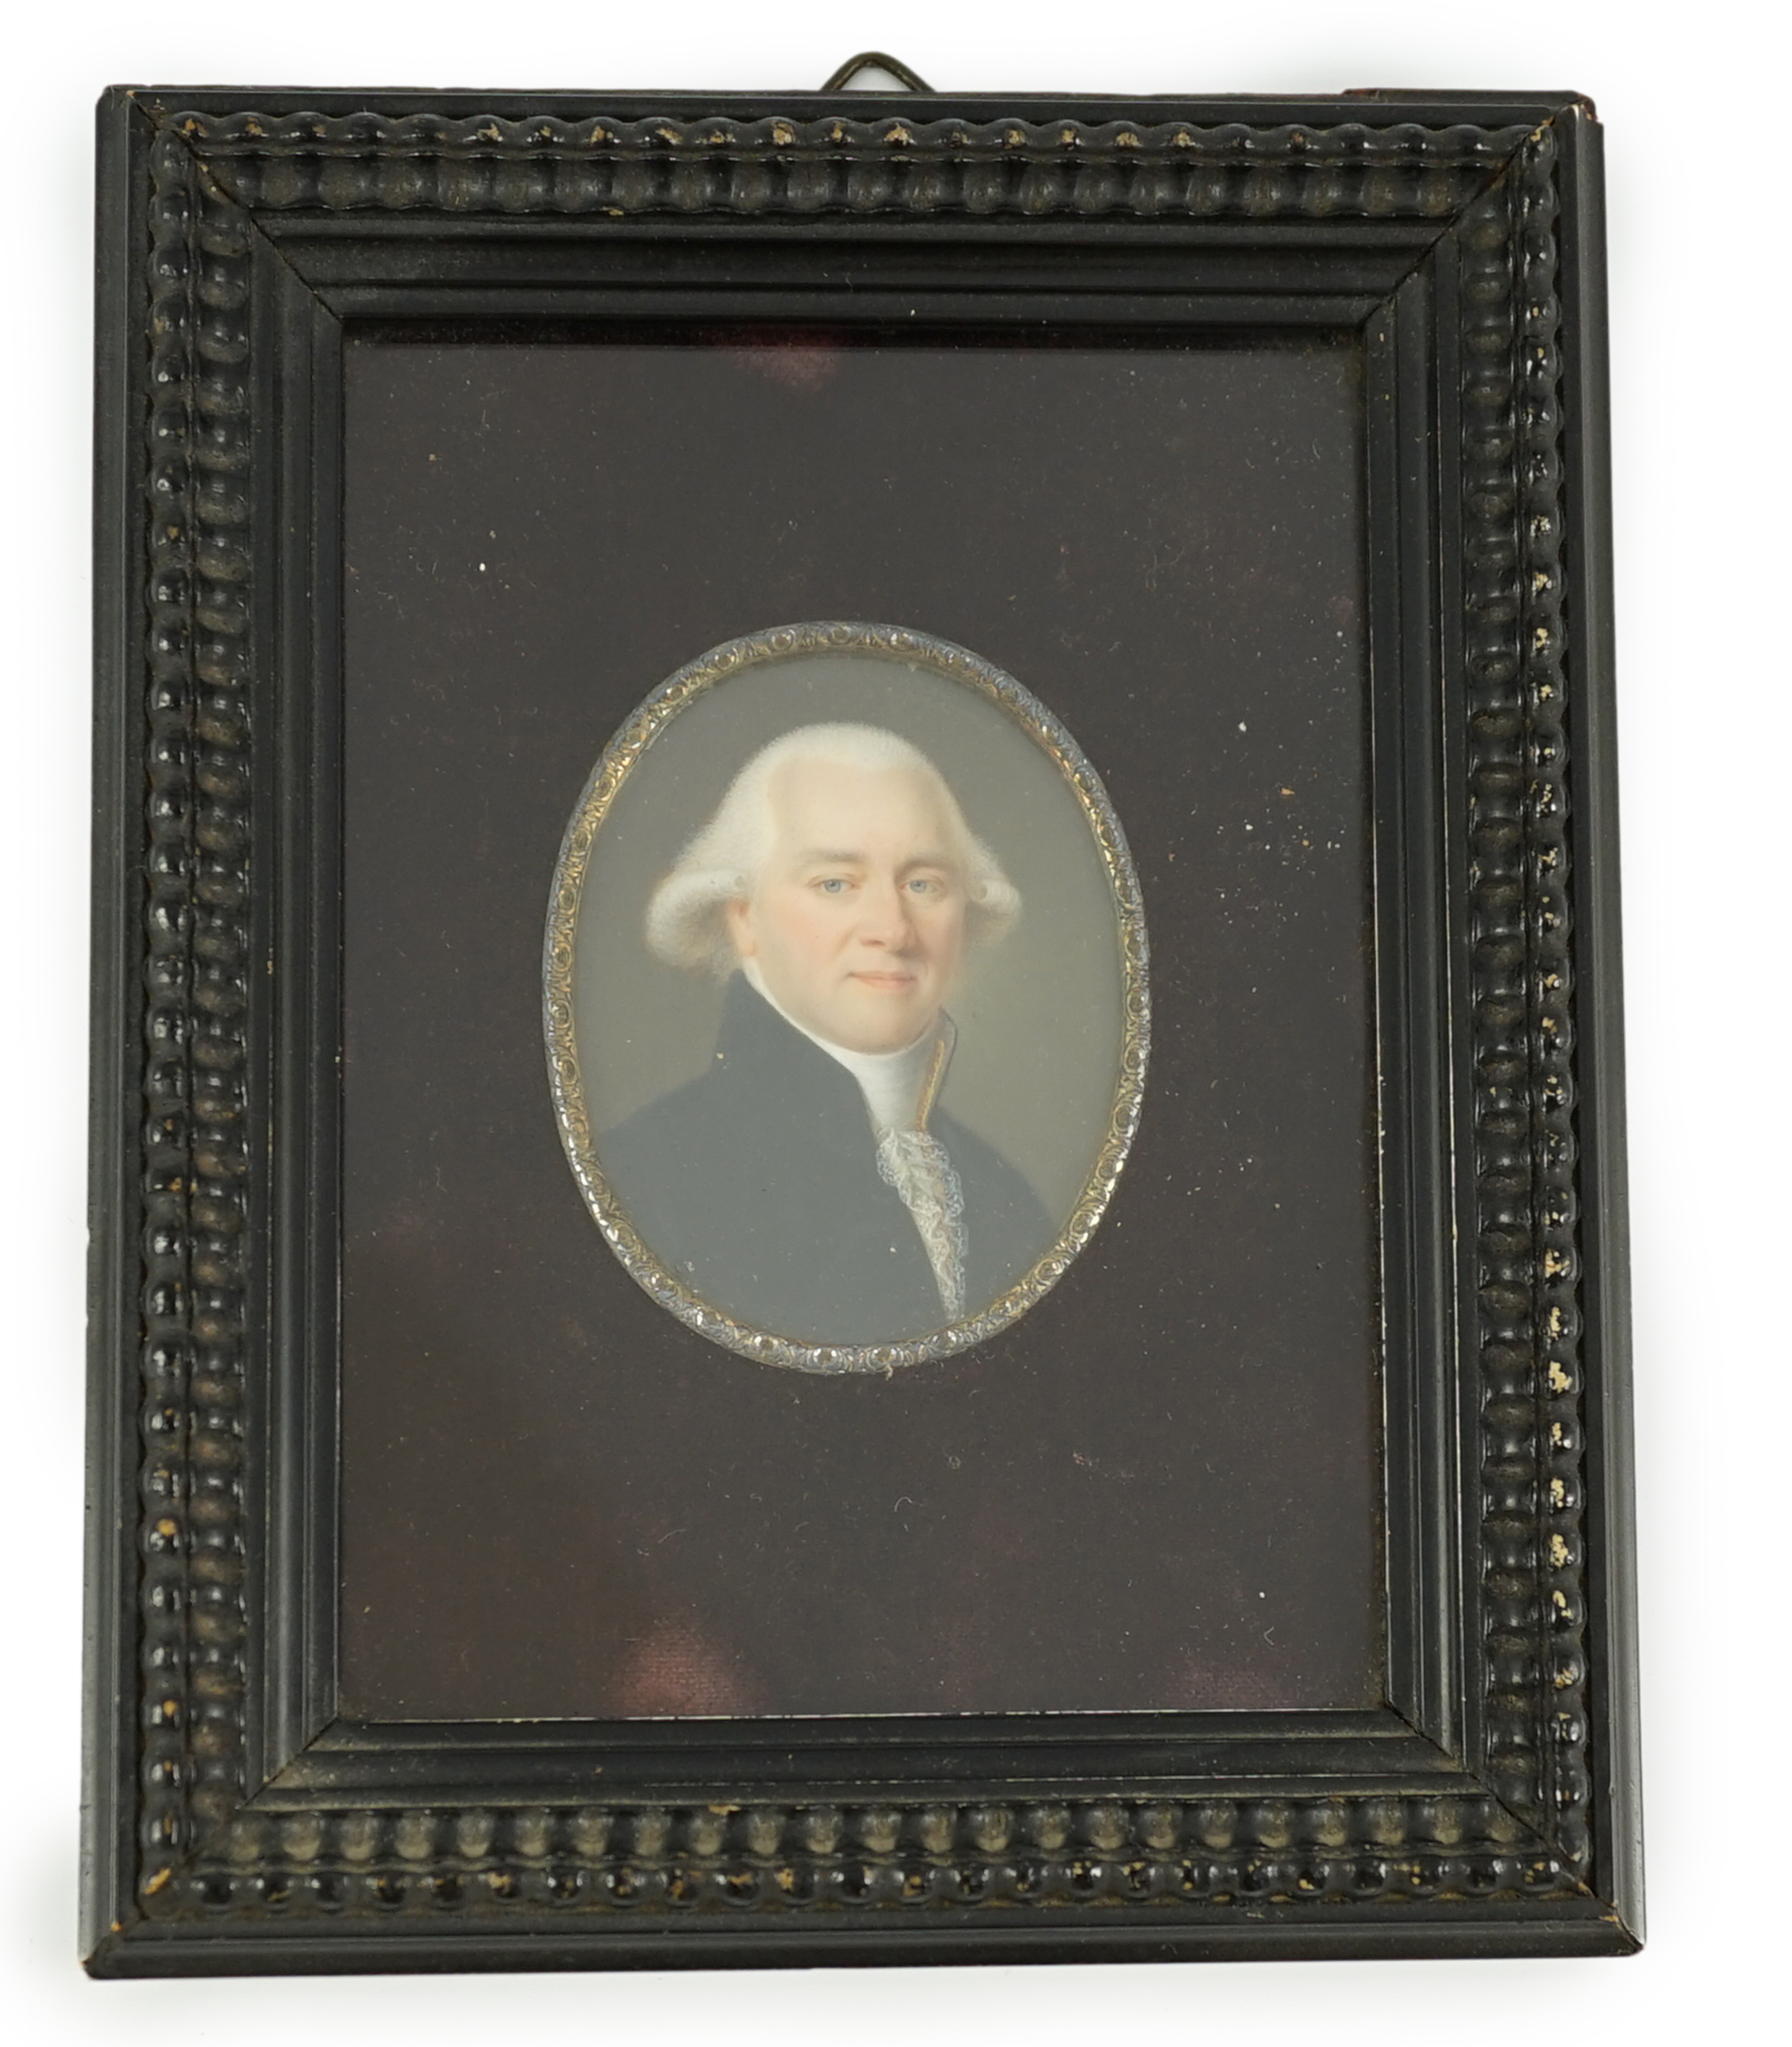 Late 18th Century Italian School, Portrait miniature of a gentleman, watercolour on ivory, 6.3 x 4.7cm. CITES Submission reference TPLMG8NW